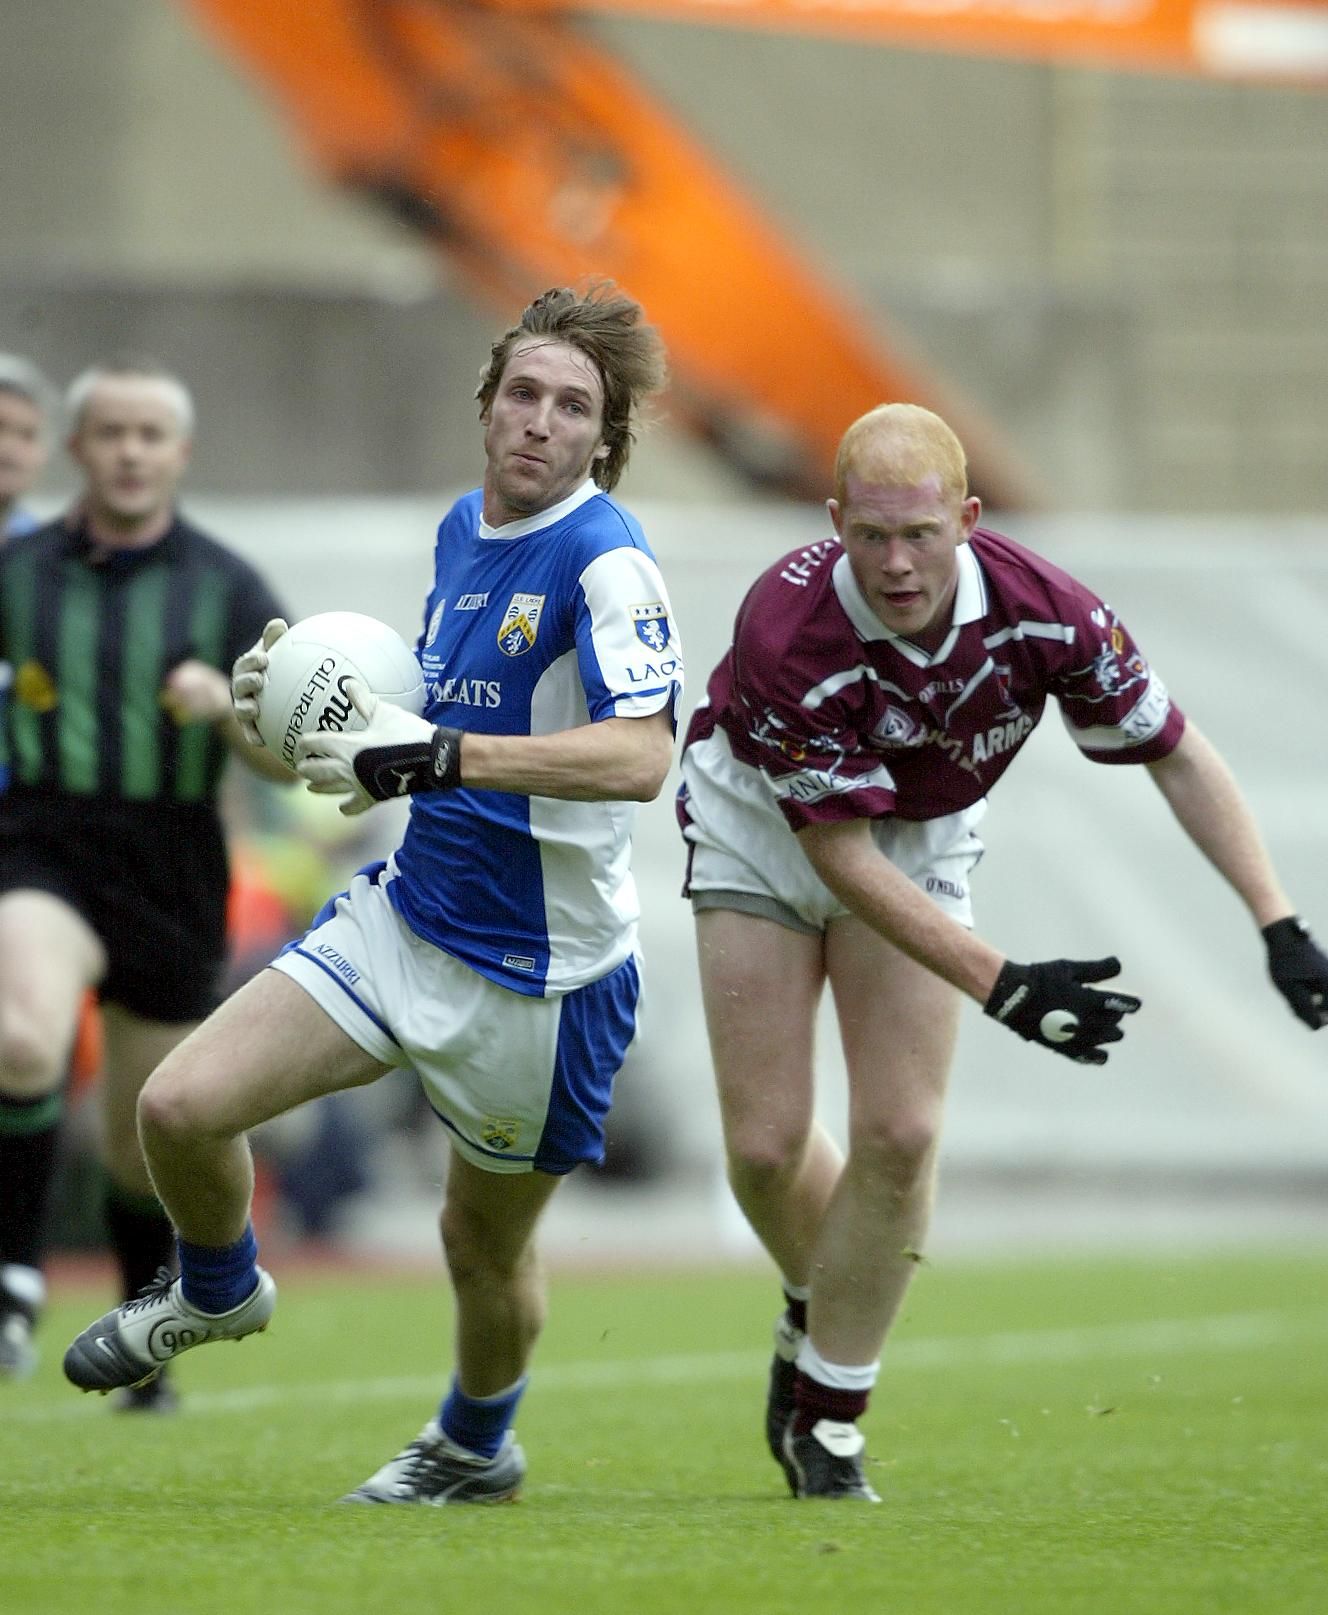 Leinster Senior Football Final Replay 24/7/2004 Laois vs Westmeath Colm Parkinson of Laois and Donal O'Donoghue of Westmeath Mandatory Credit ©INPHO/Donall Farmer